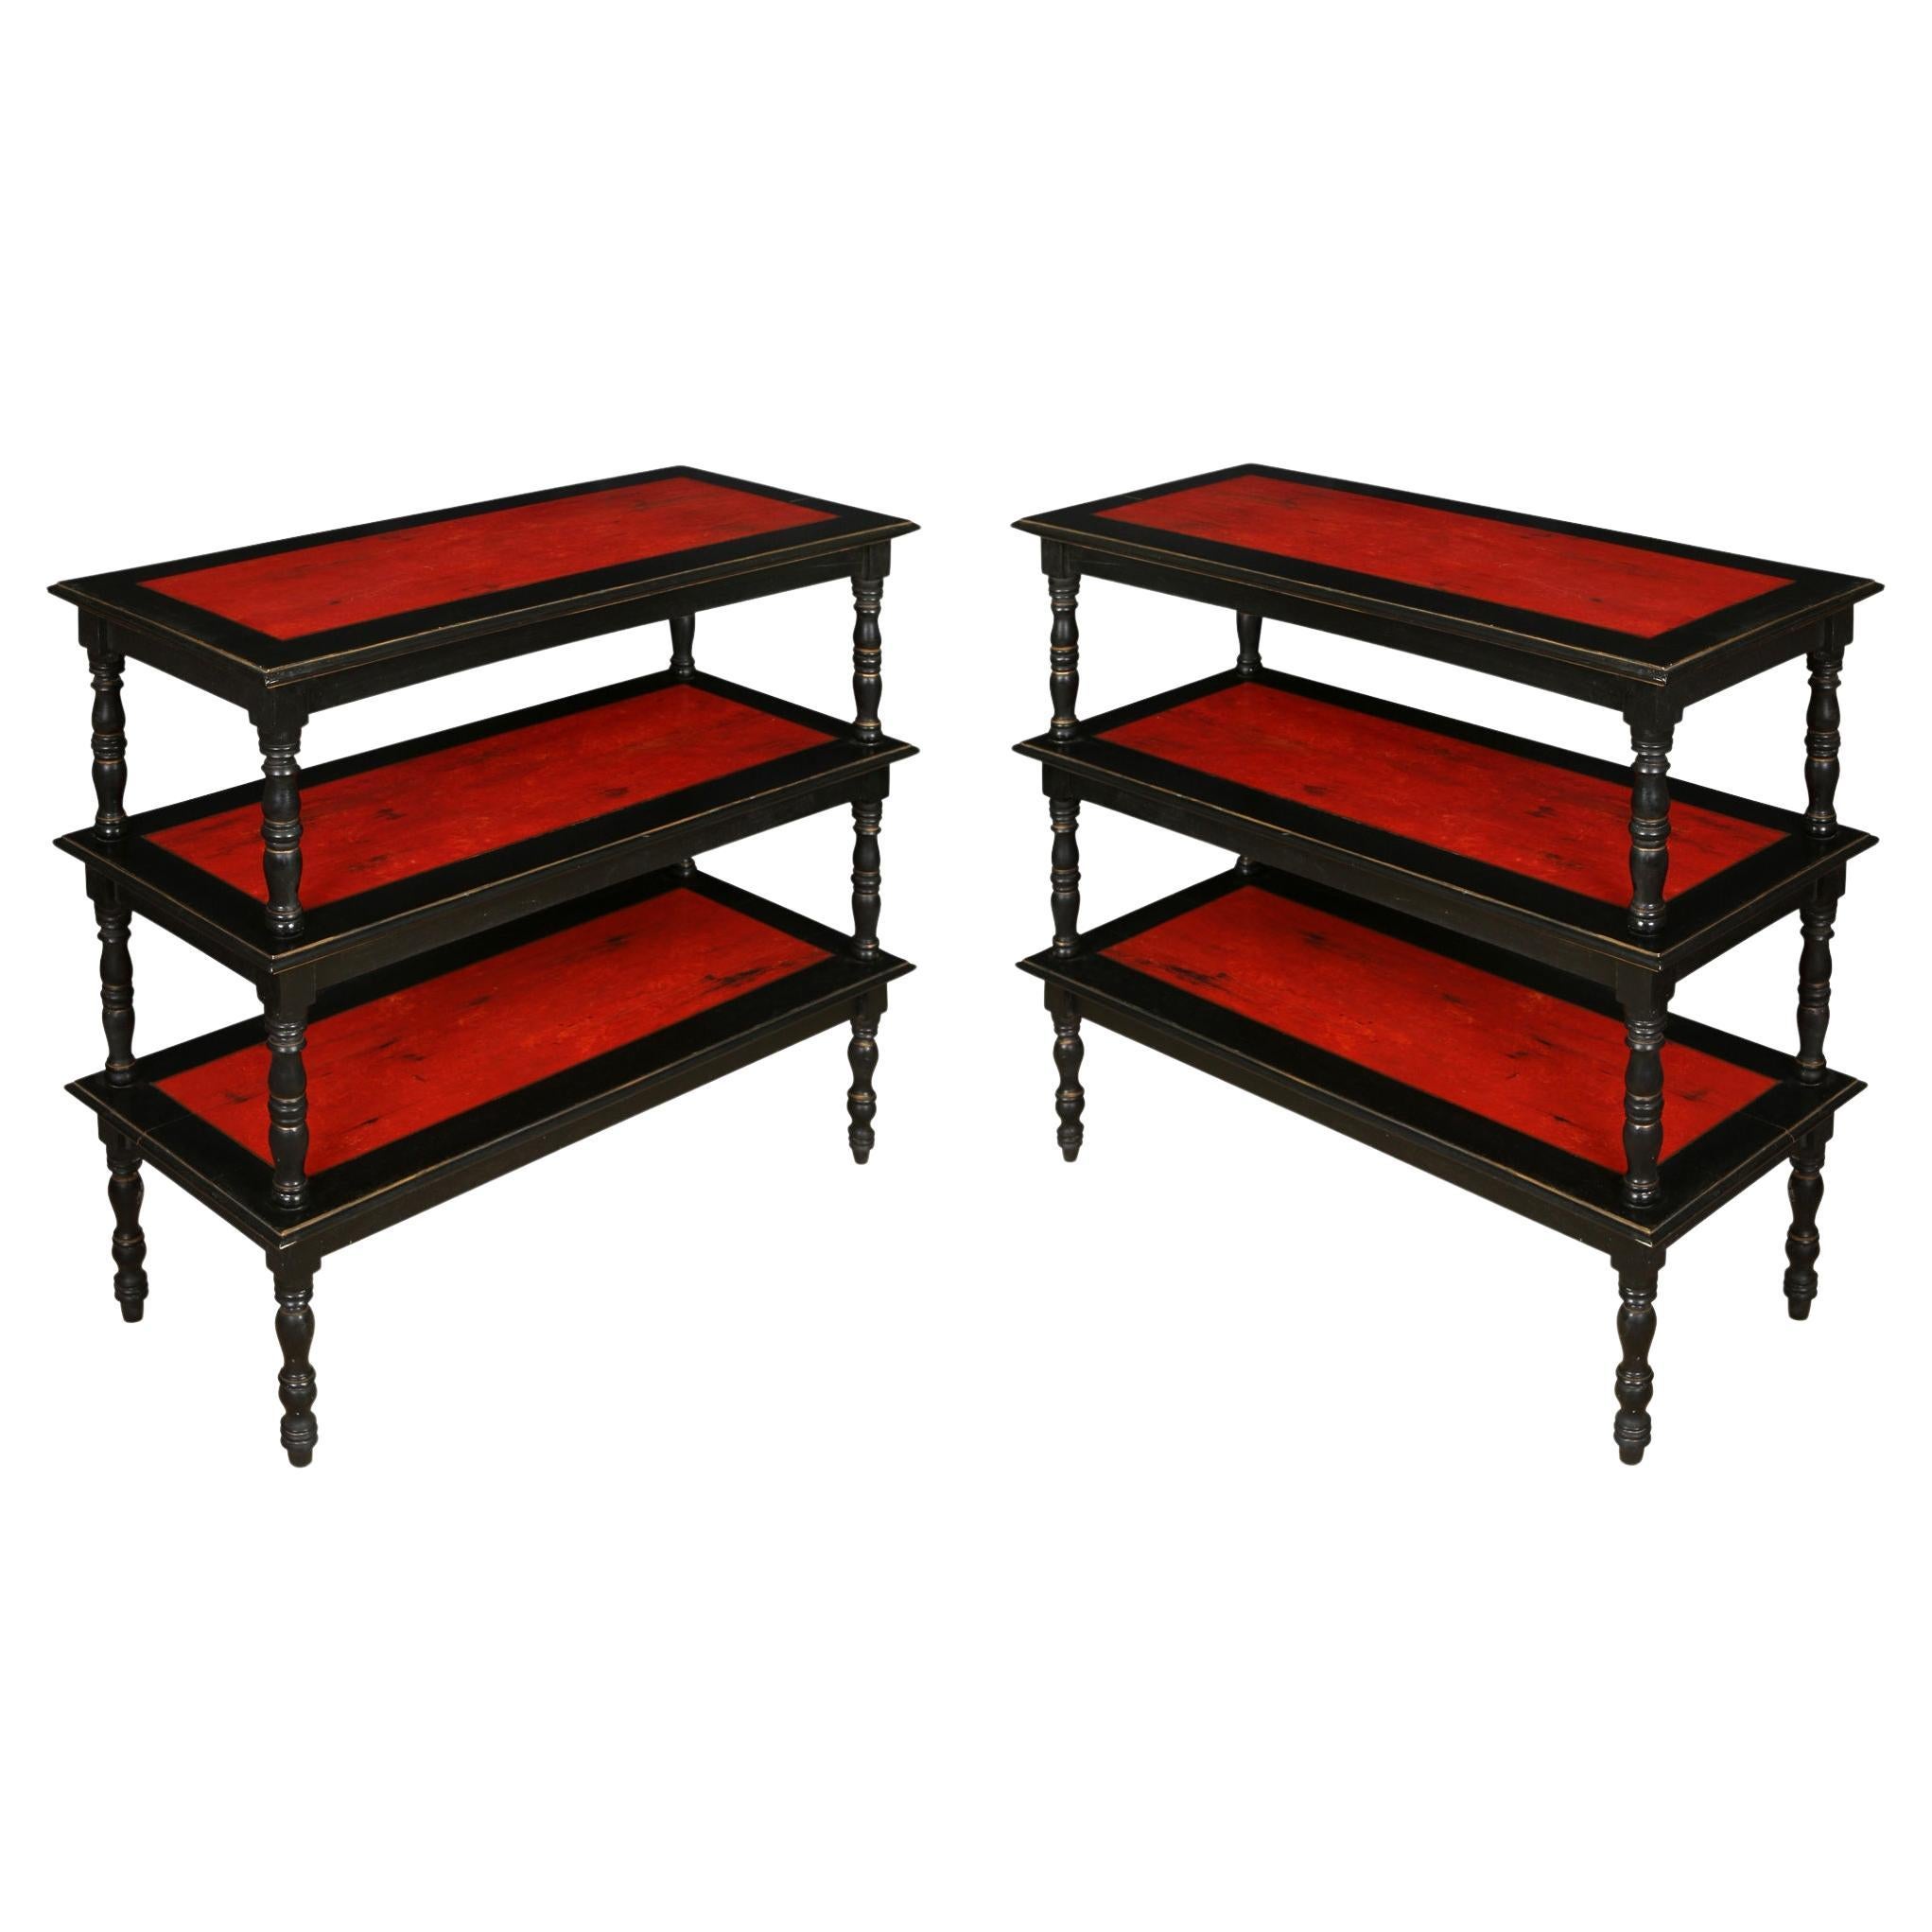 Vintage Pair of Three Tier Etageres Painted Black with Red Shelves